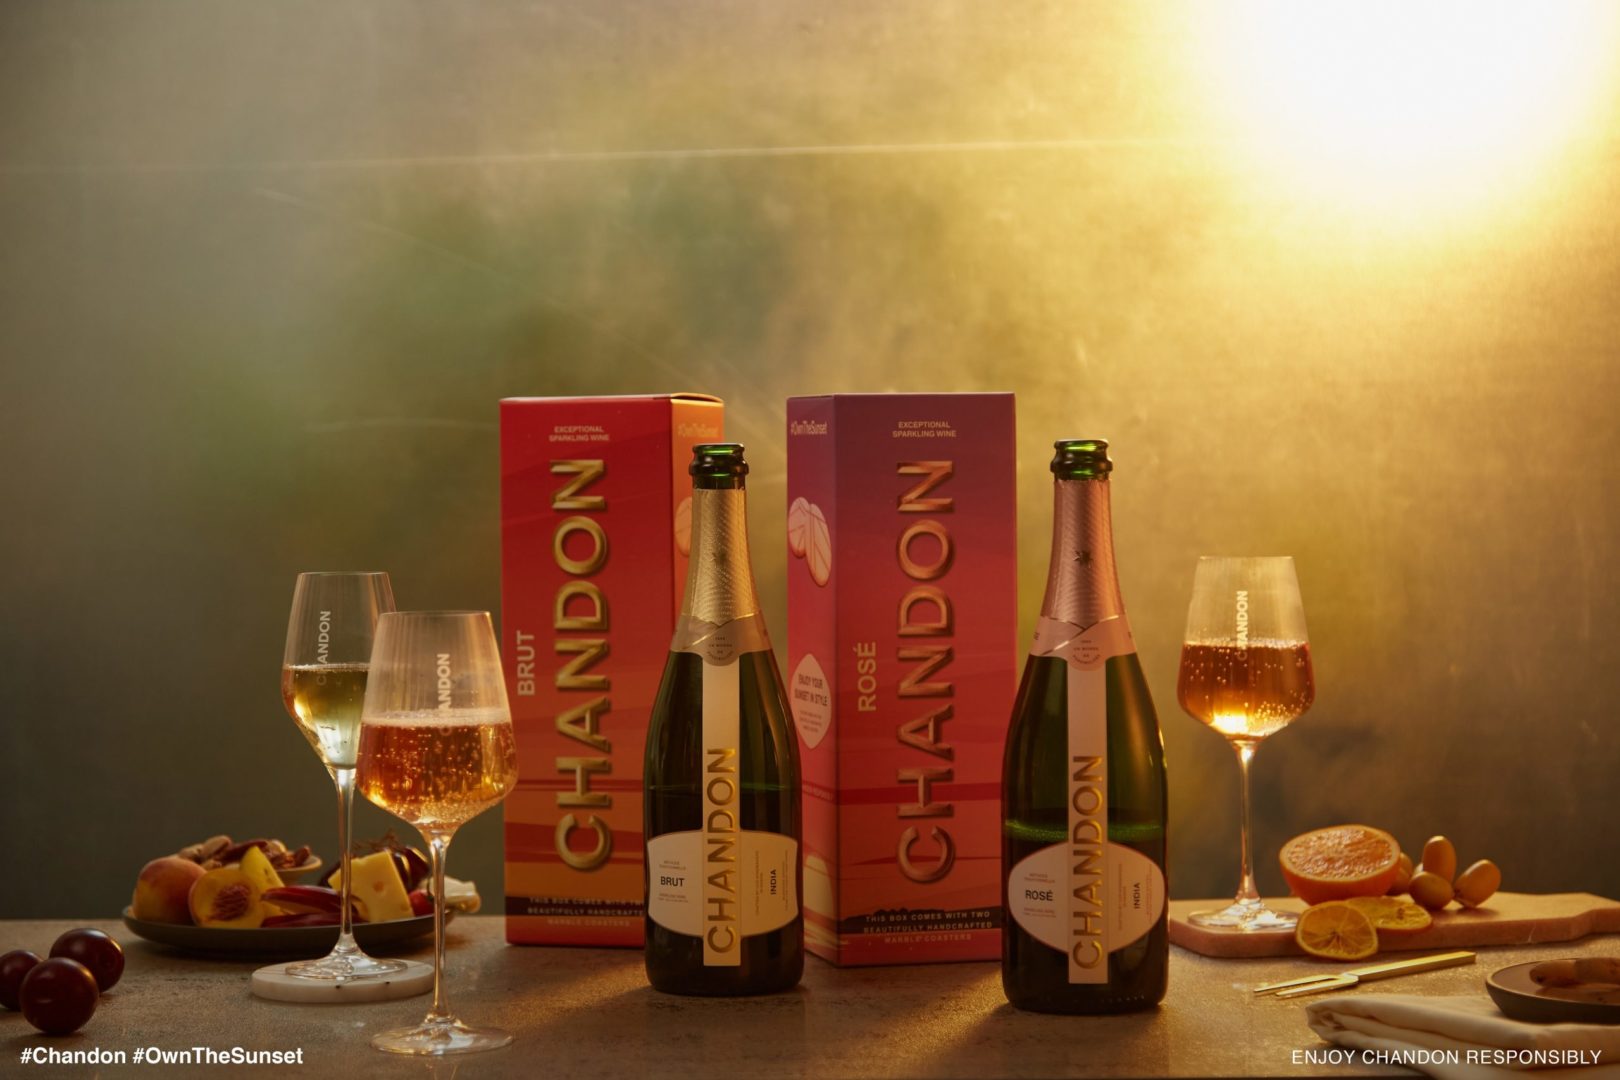 Moet Hennessy Launches Sparkling Wine, Chandon in Delhi